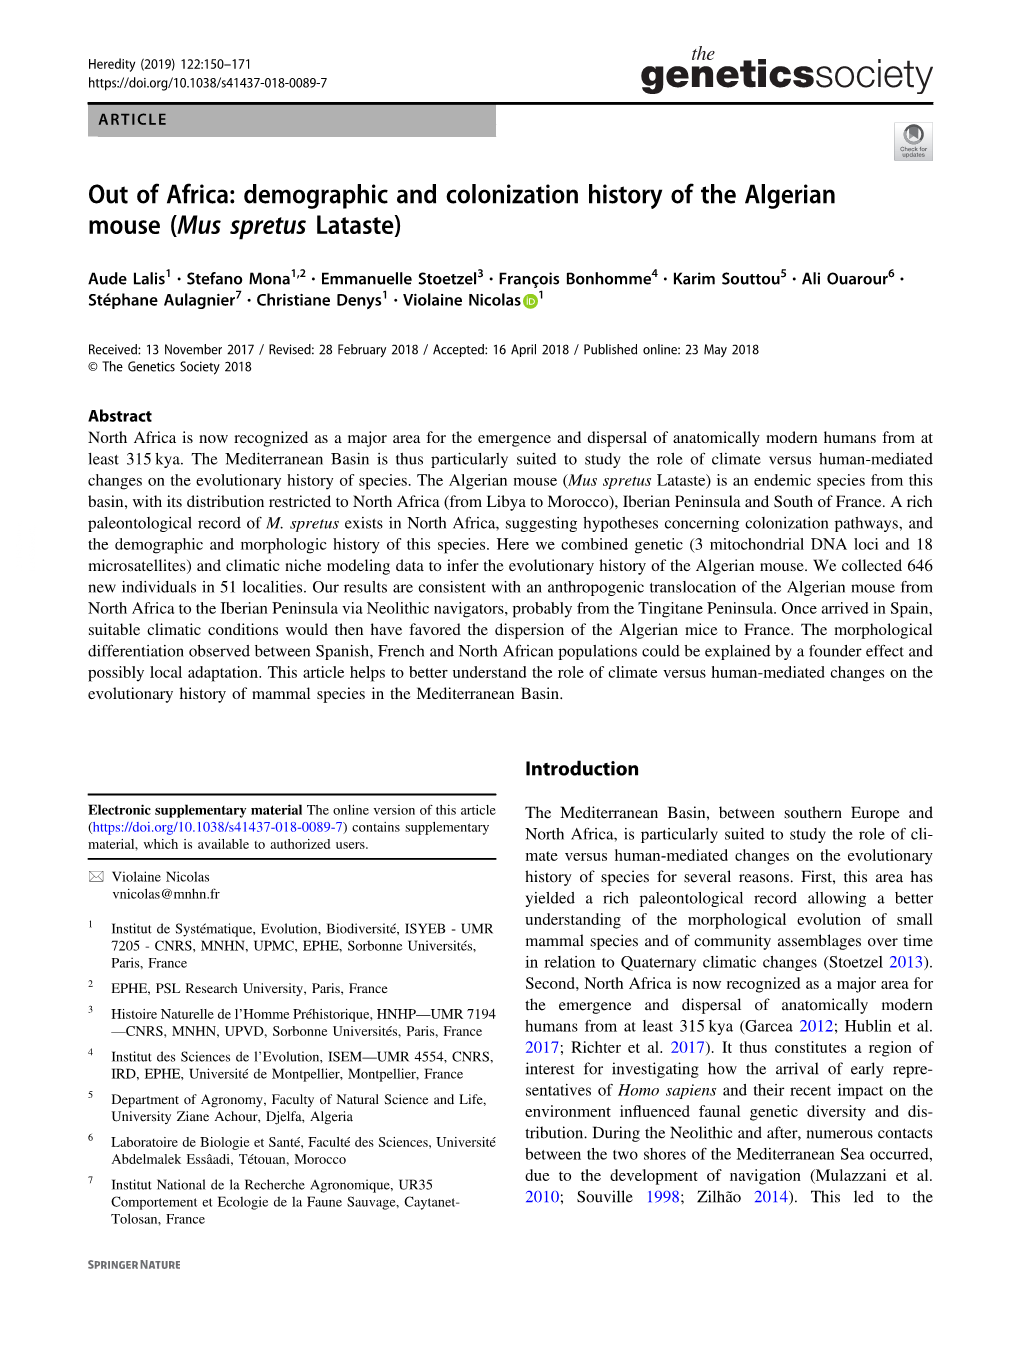 Out of Africa: Demographic and Colonization History of the Algerian Mouse (Mus Spretus Lataste)